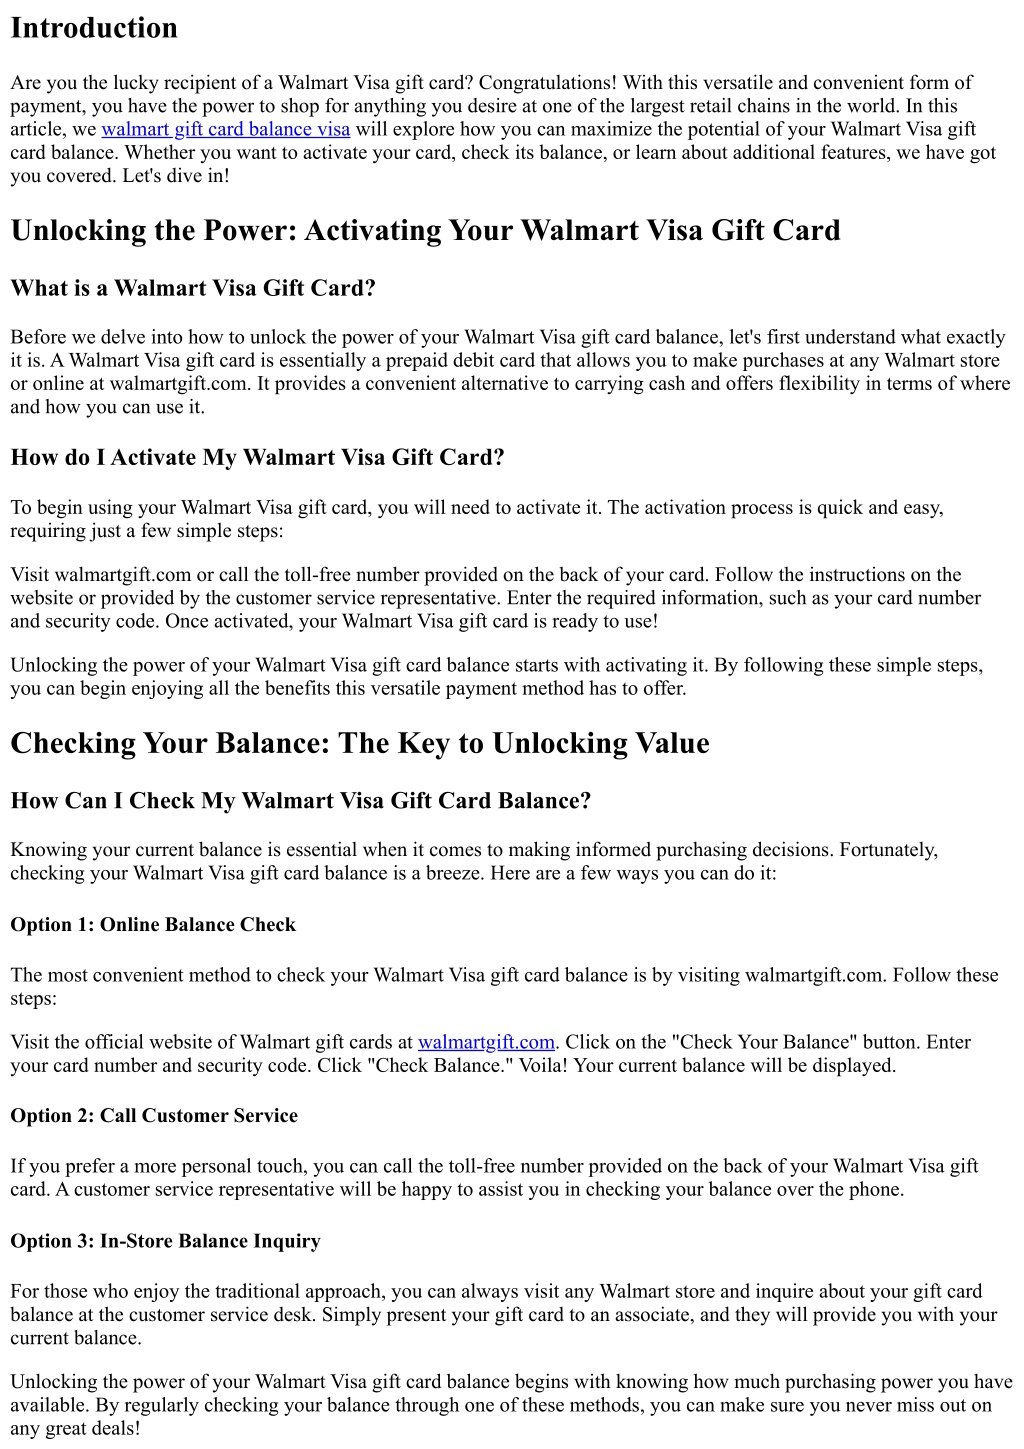 GiftCardslink.com - How to Check Your Walmart Gift Card Balance?  https://bit.ly/35Yapny | Facebook